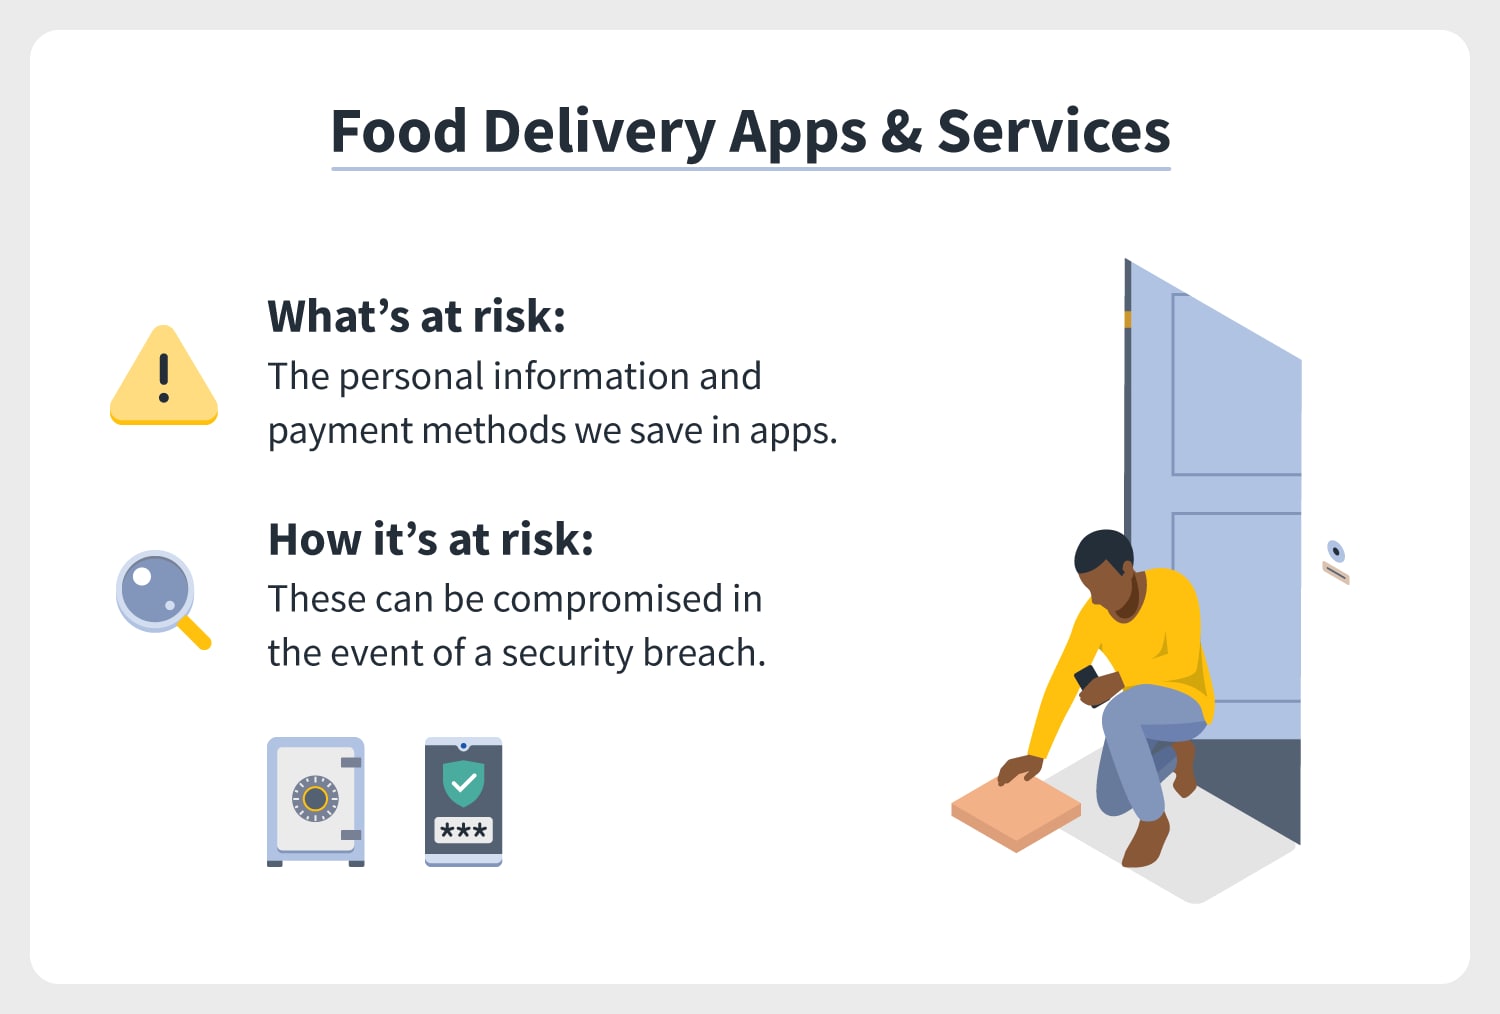 an illustration of a person picking up a box of pizza off of their doorstep while they hold a cell phone in their hand, indicating they used an app to order the pizza and gave up some online privacy